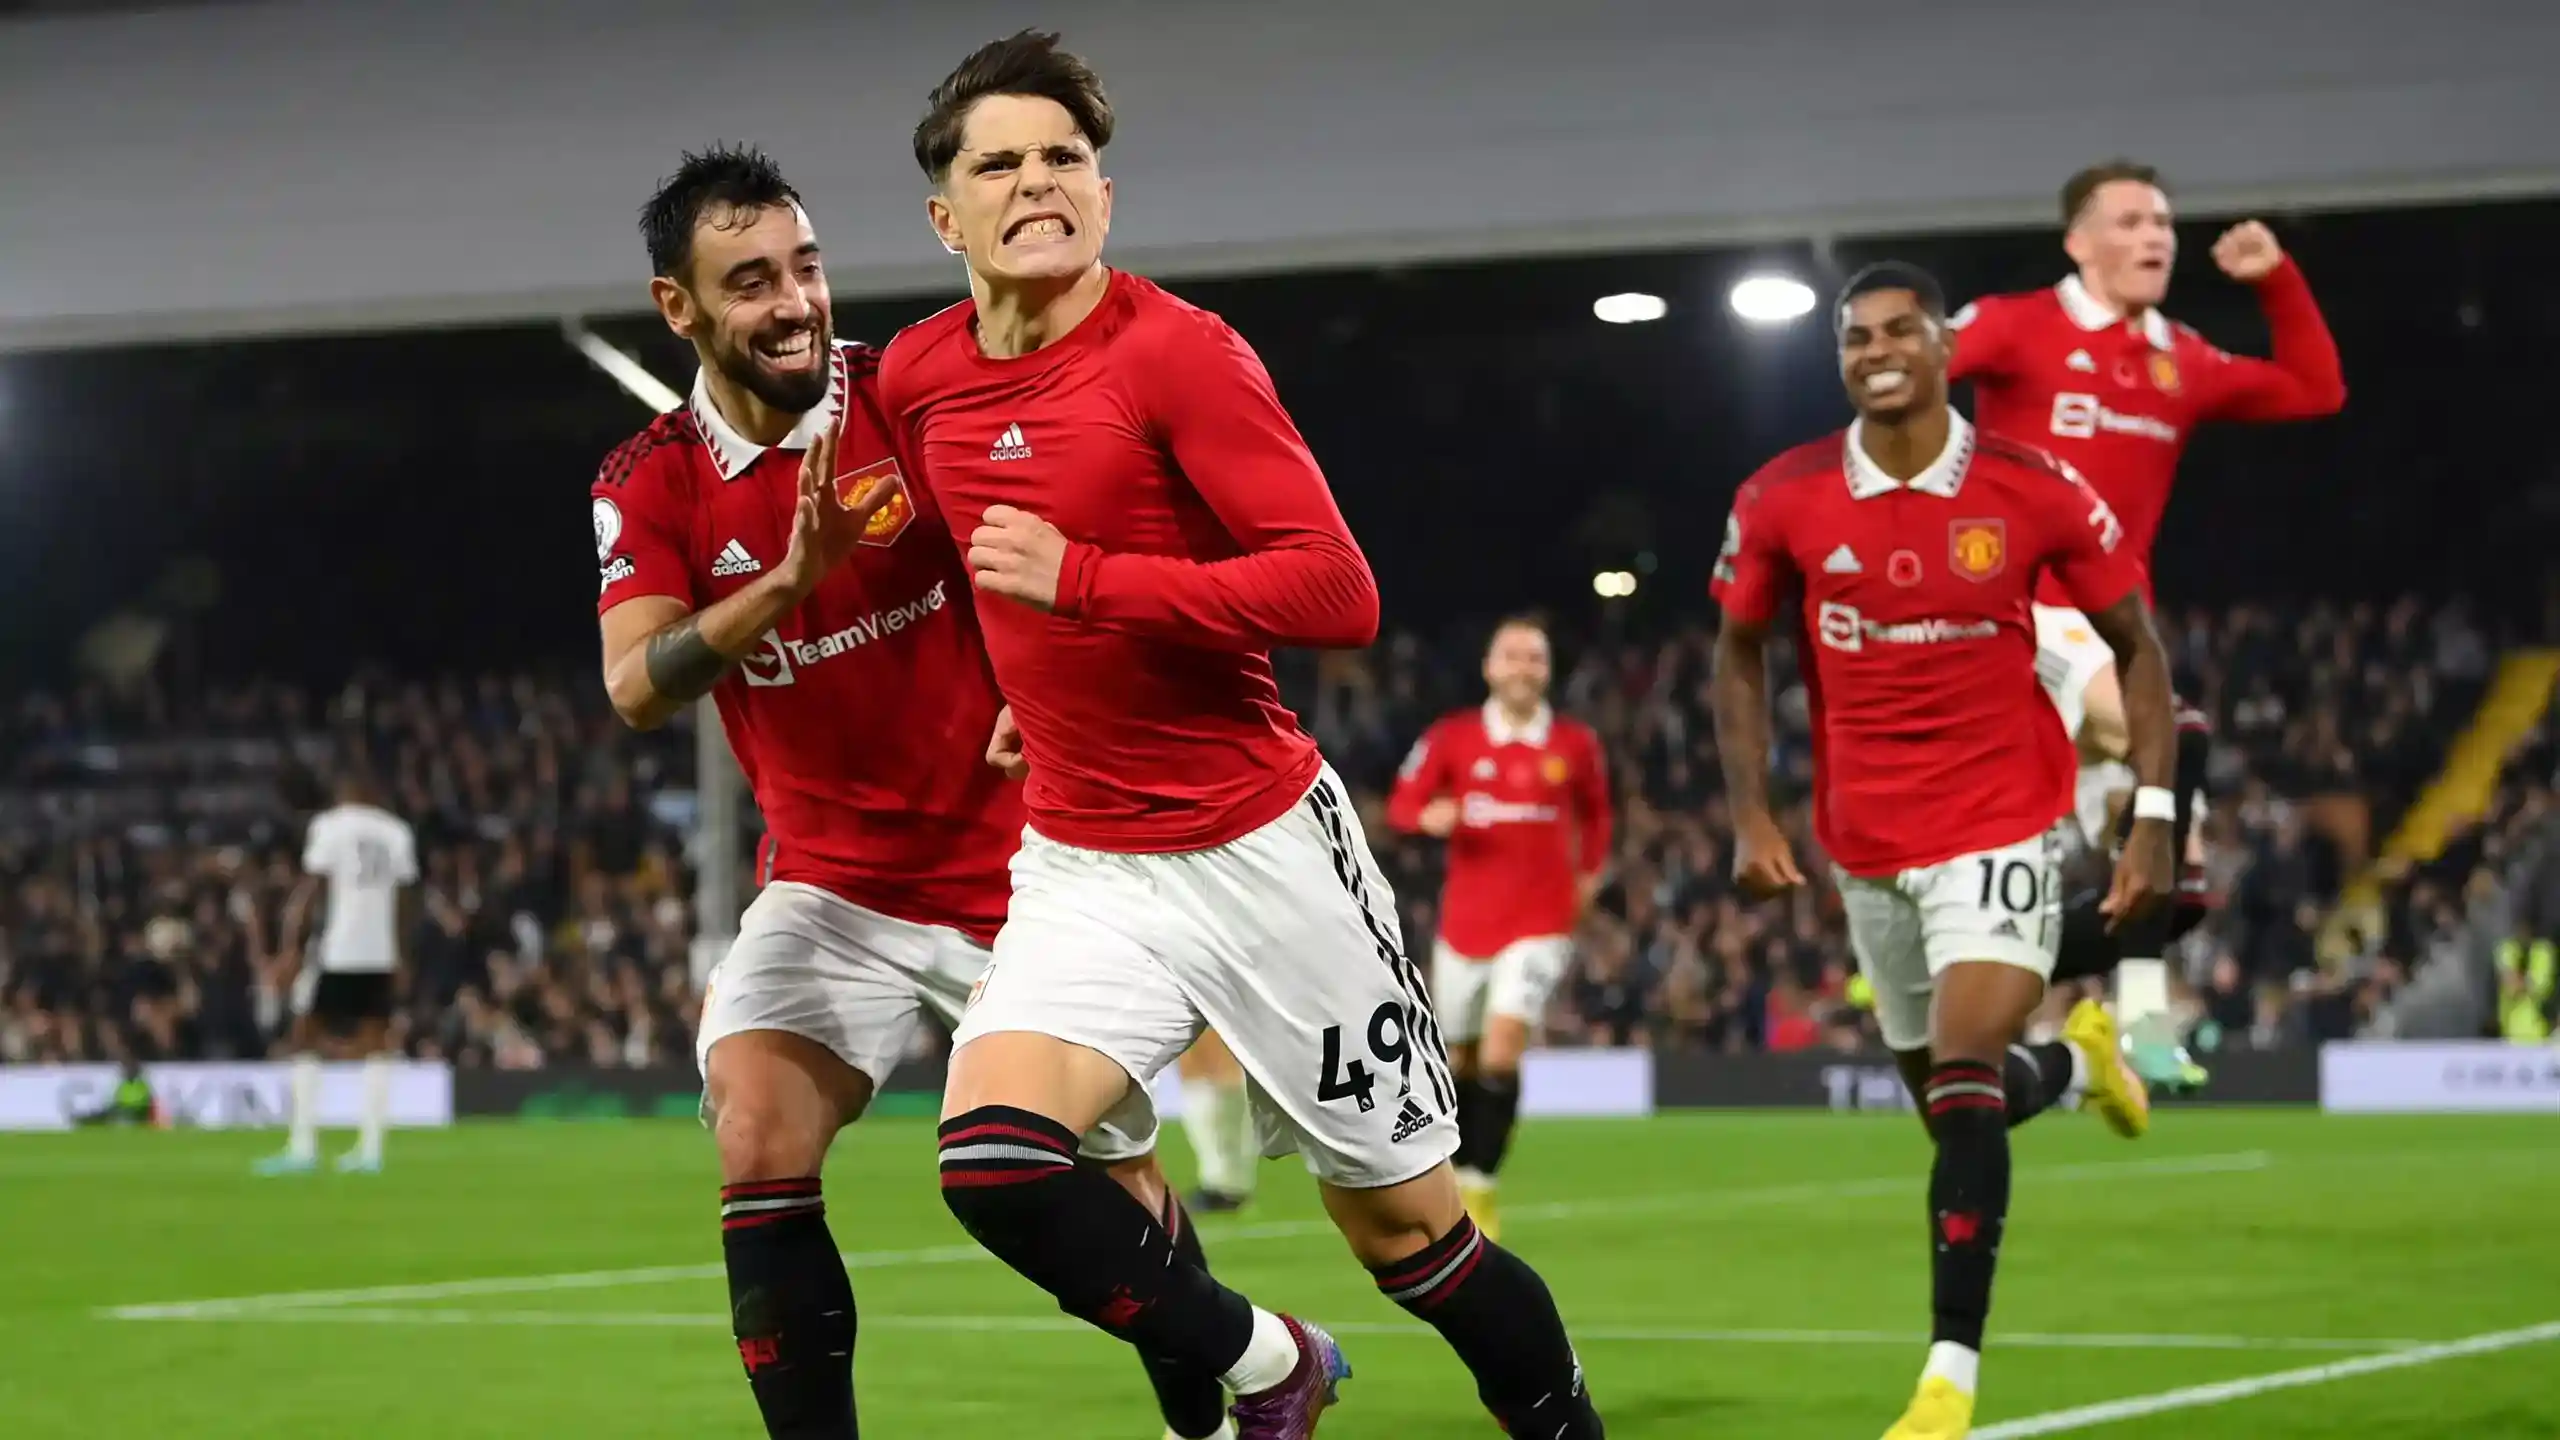 Maguire out, Kane in: How Manchester United could line up in 2023/24